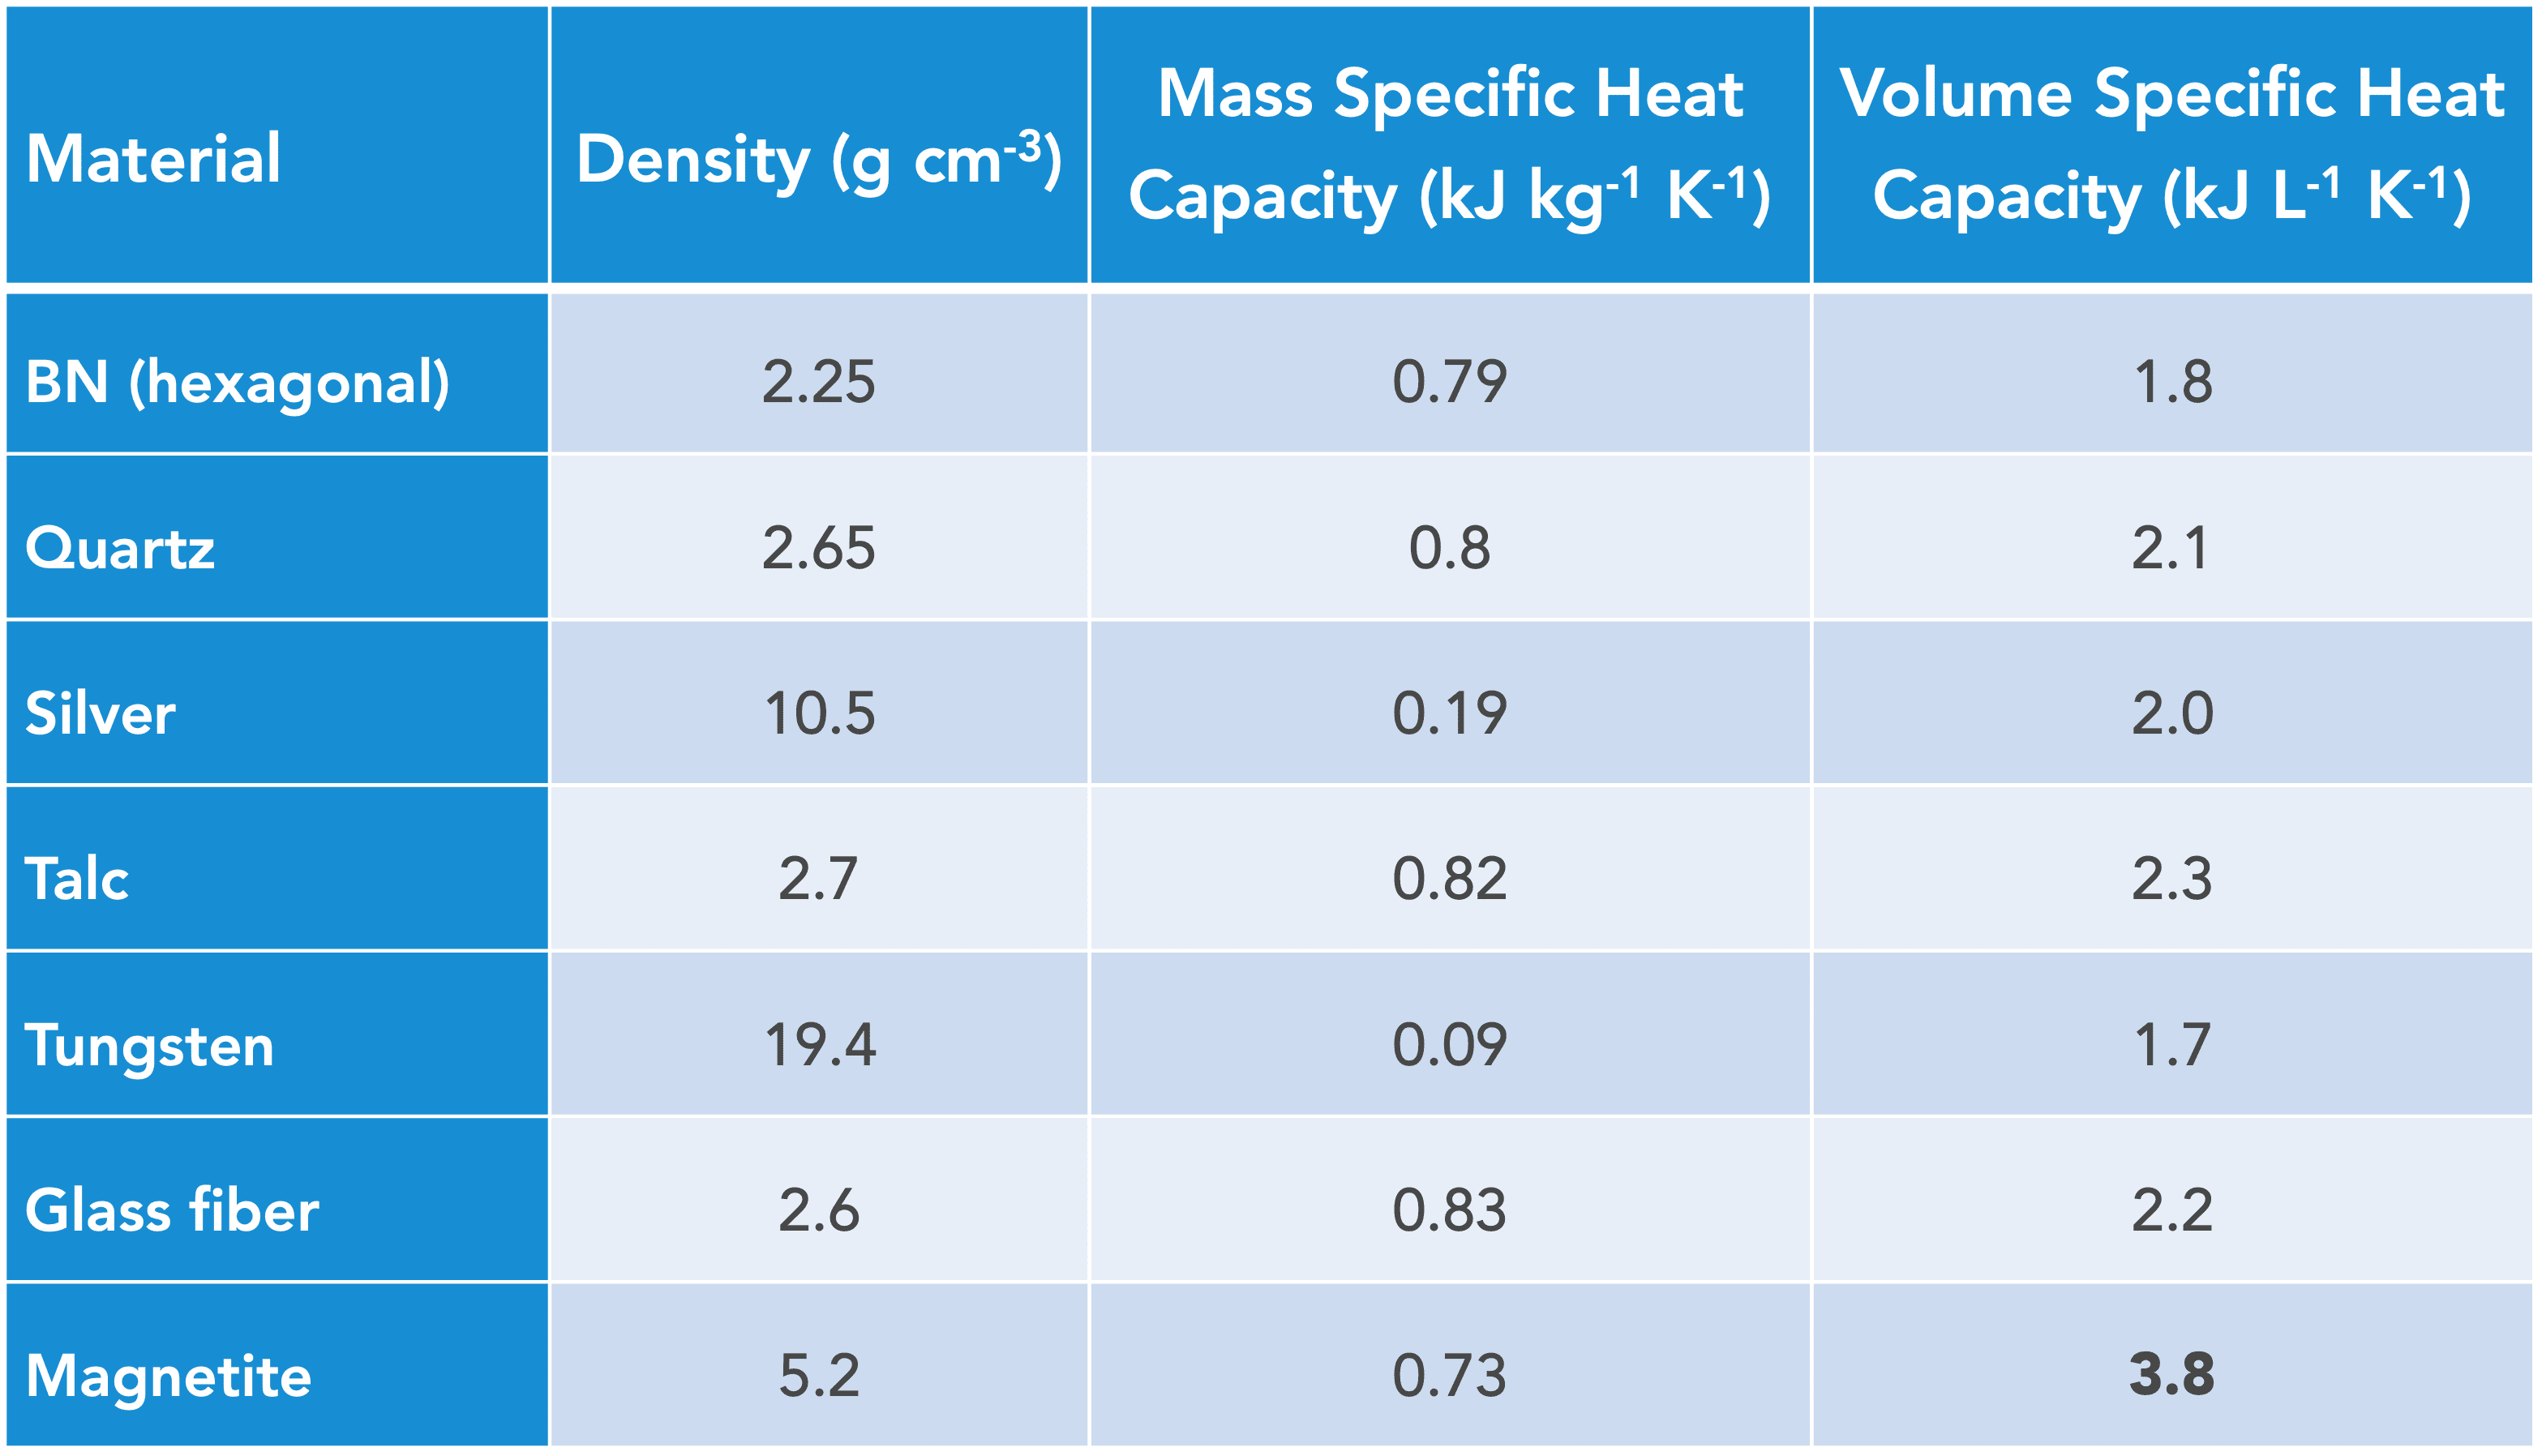 Specific Heat Capacity of Magnetite and Common Mineral Fillers